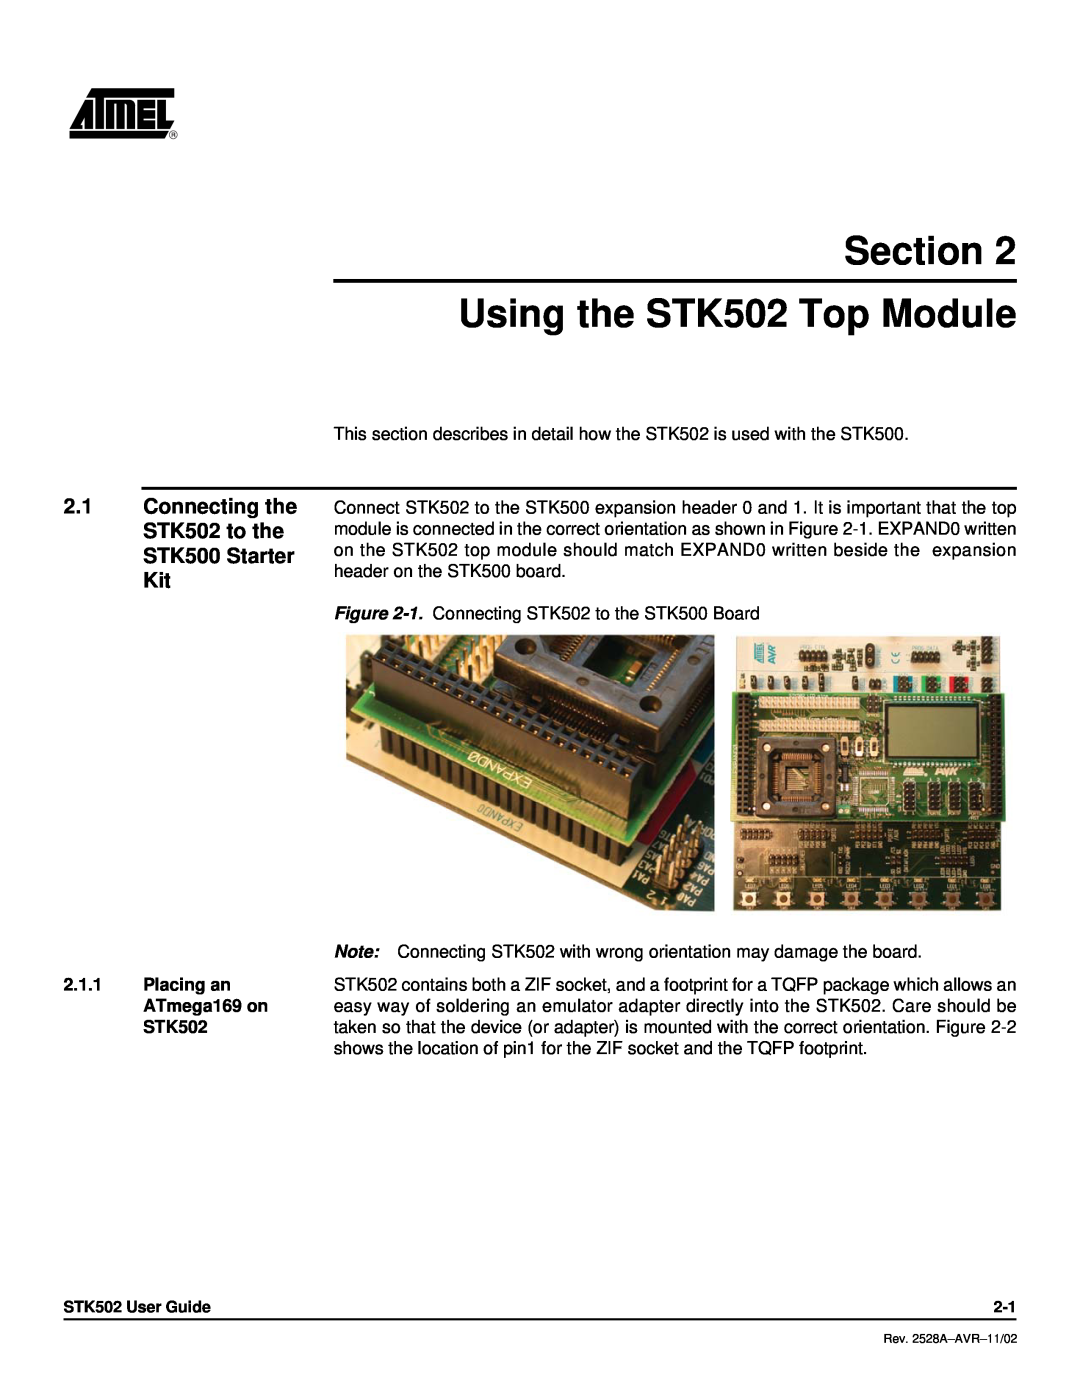 Atmel manual Section Using the STK502 Top Module, Connecting the STK502 to the STK500 Starter Kit, 2.1.1, Placing an 